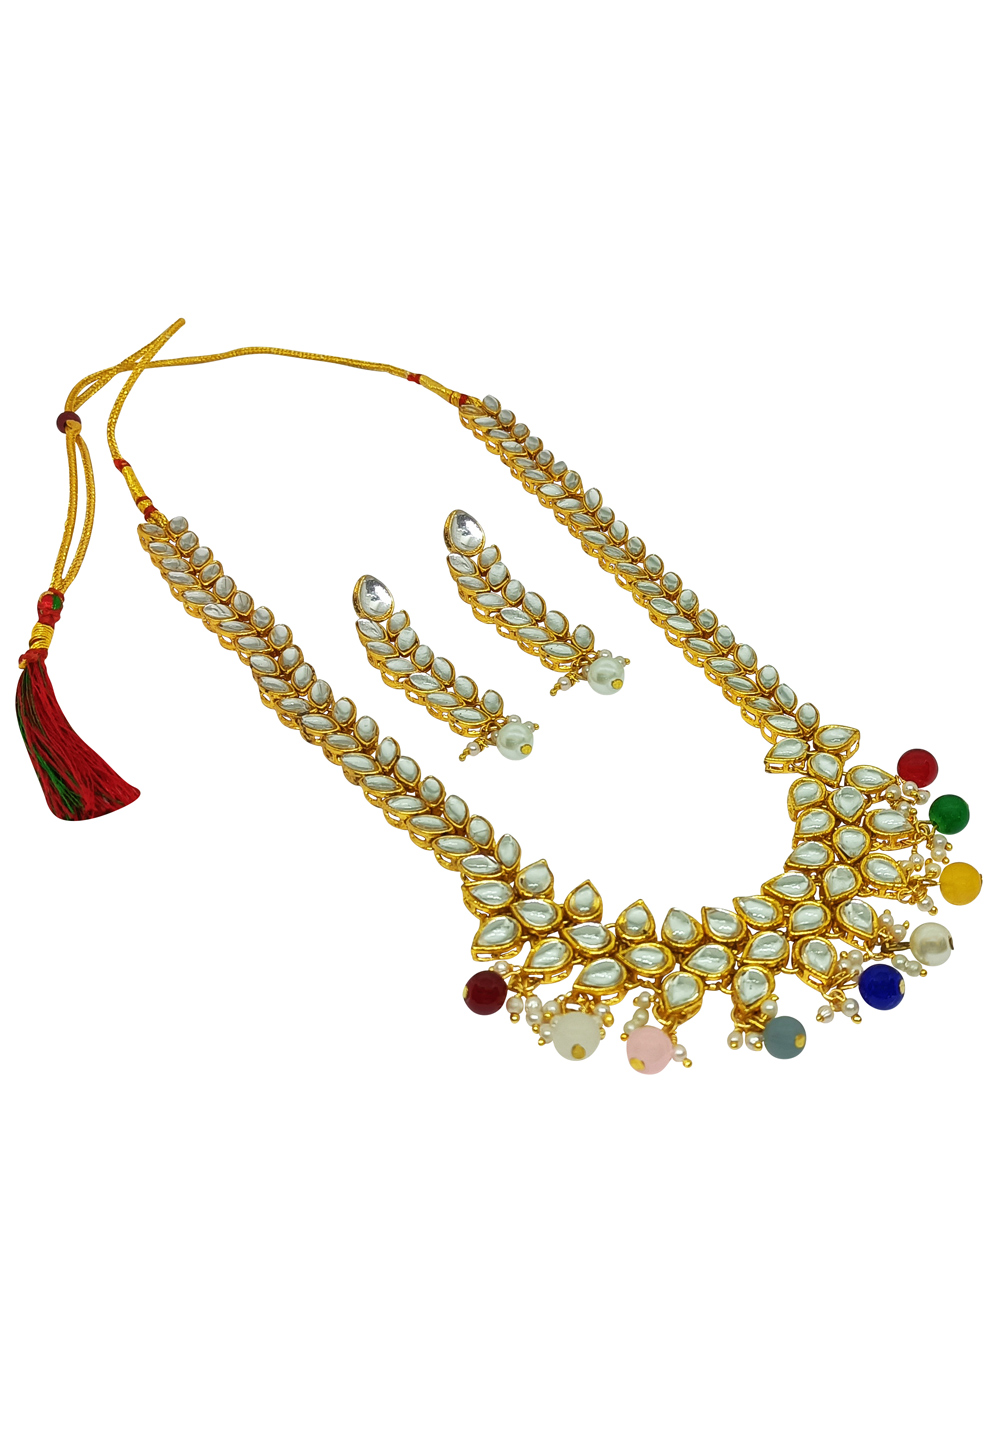 Off White Alloy Austrian Diamonds And Kundan Necklace Set With Earrings 269269